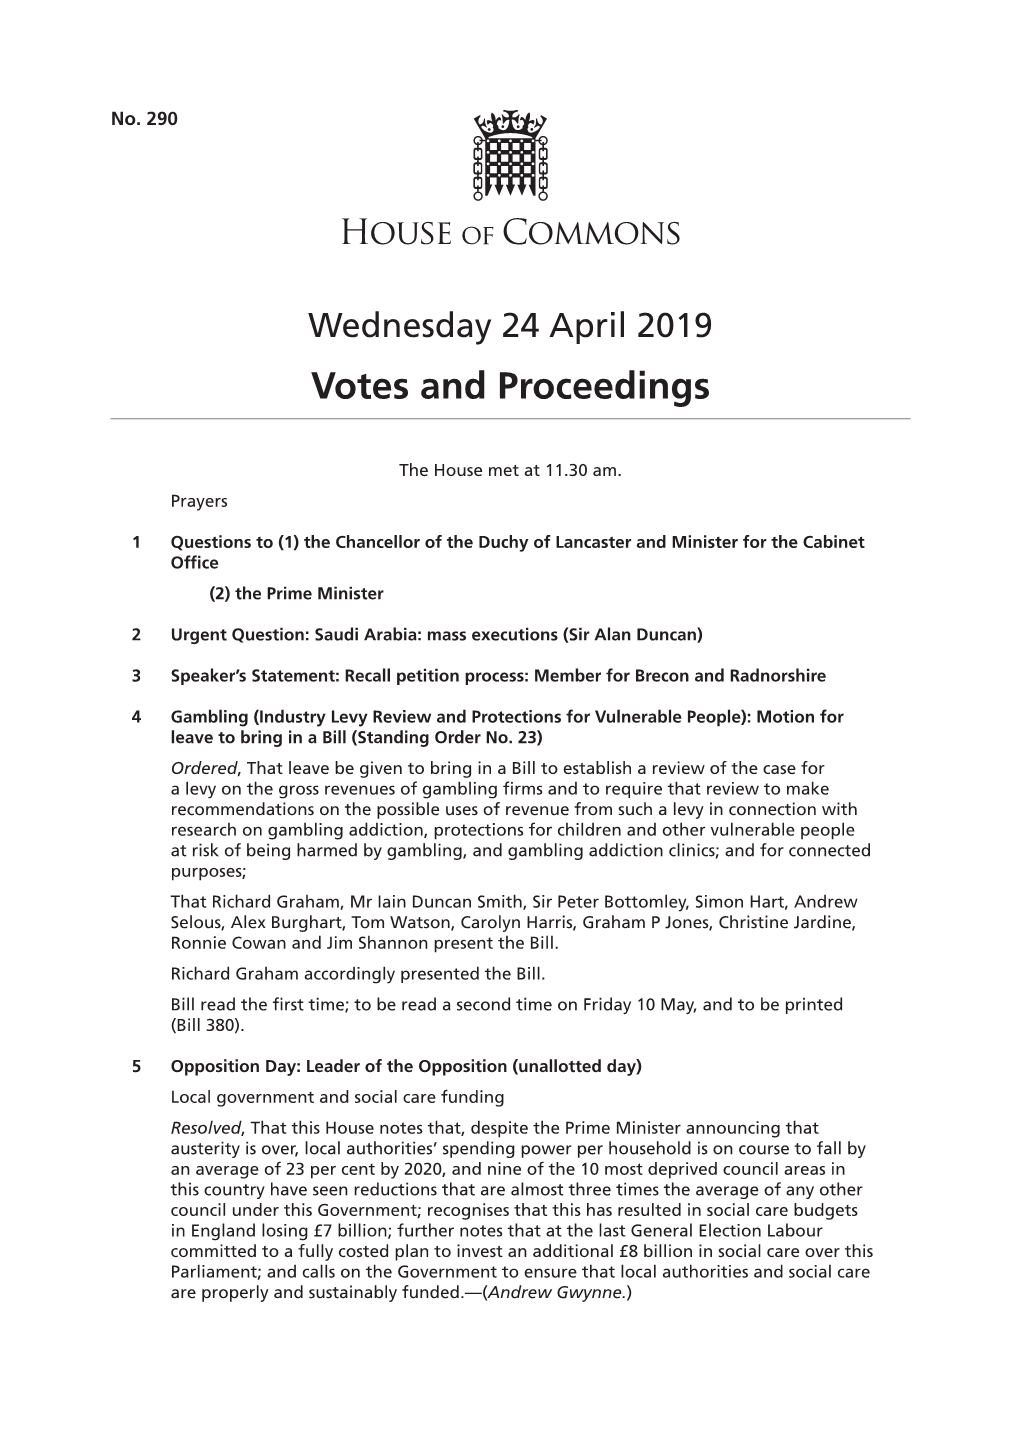 Votes and Proceedings for 24 Apr 2019